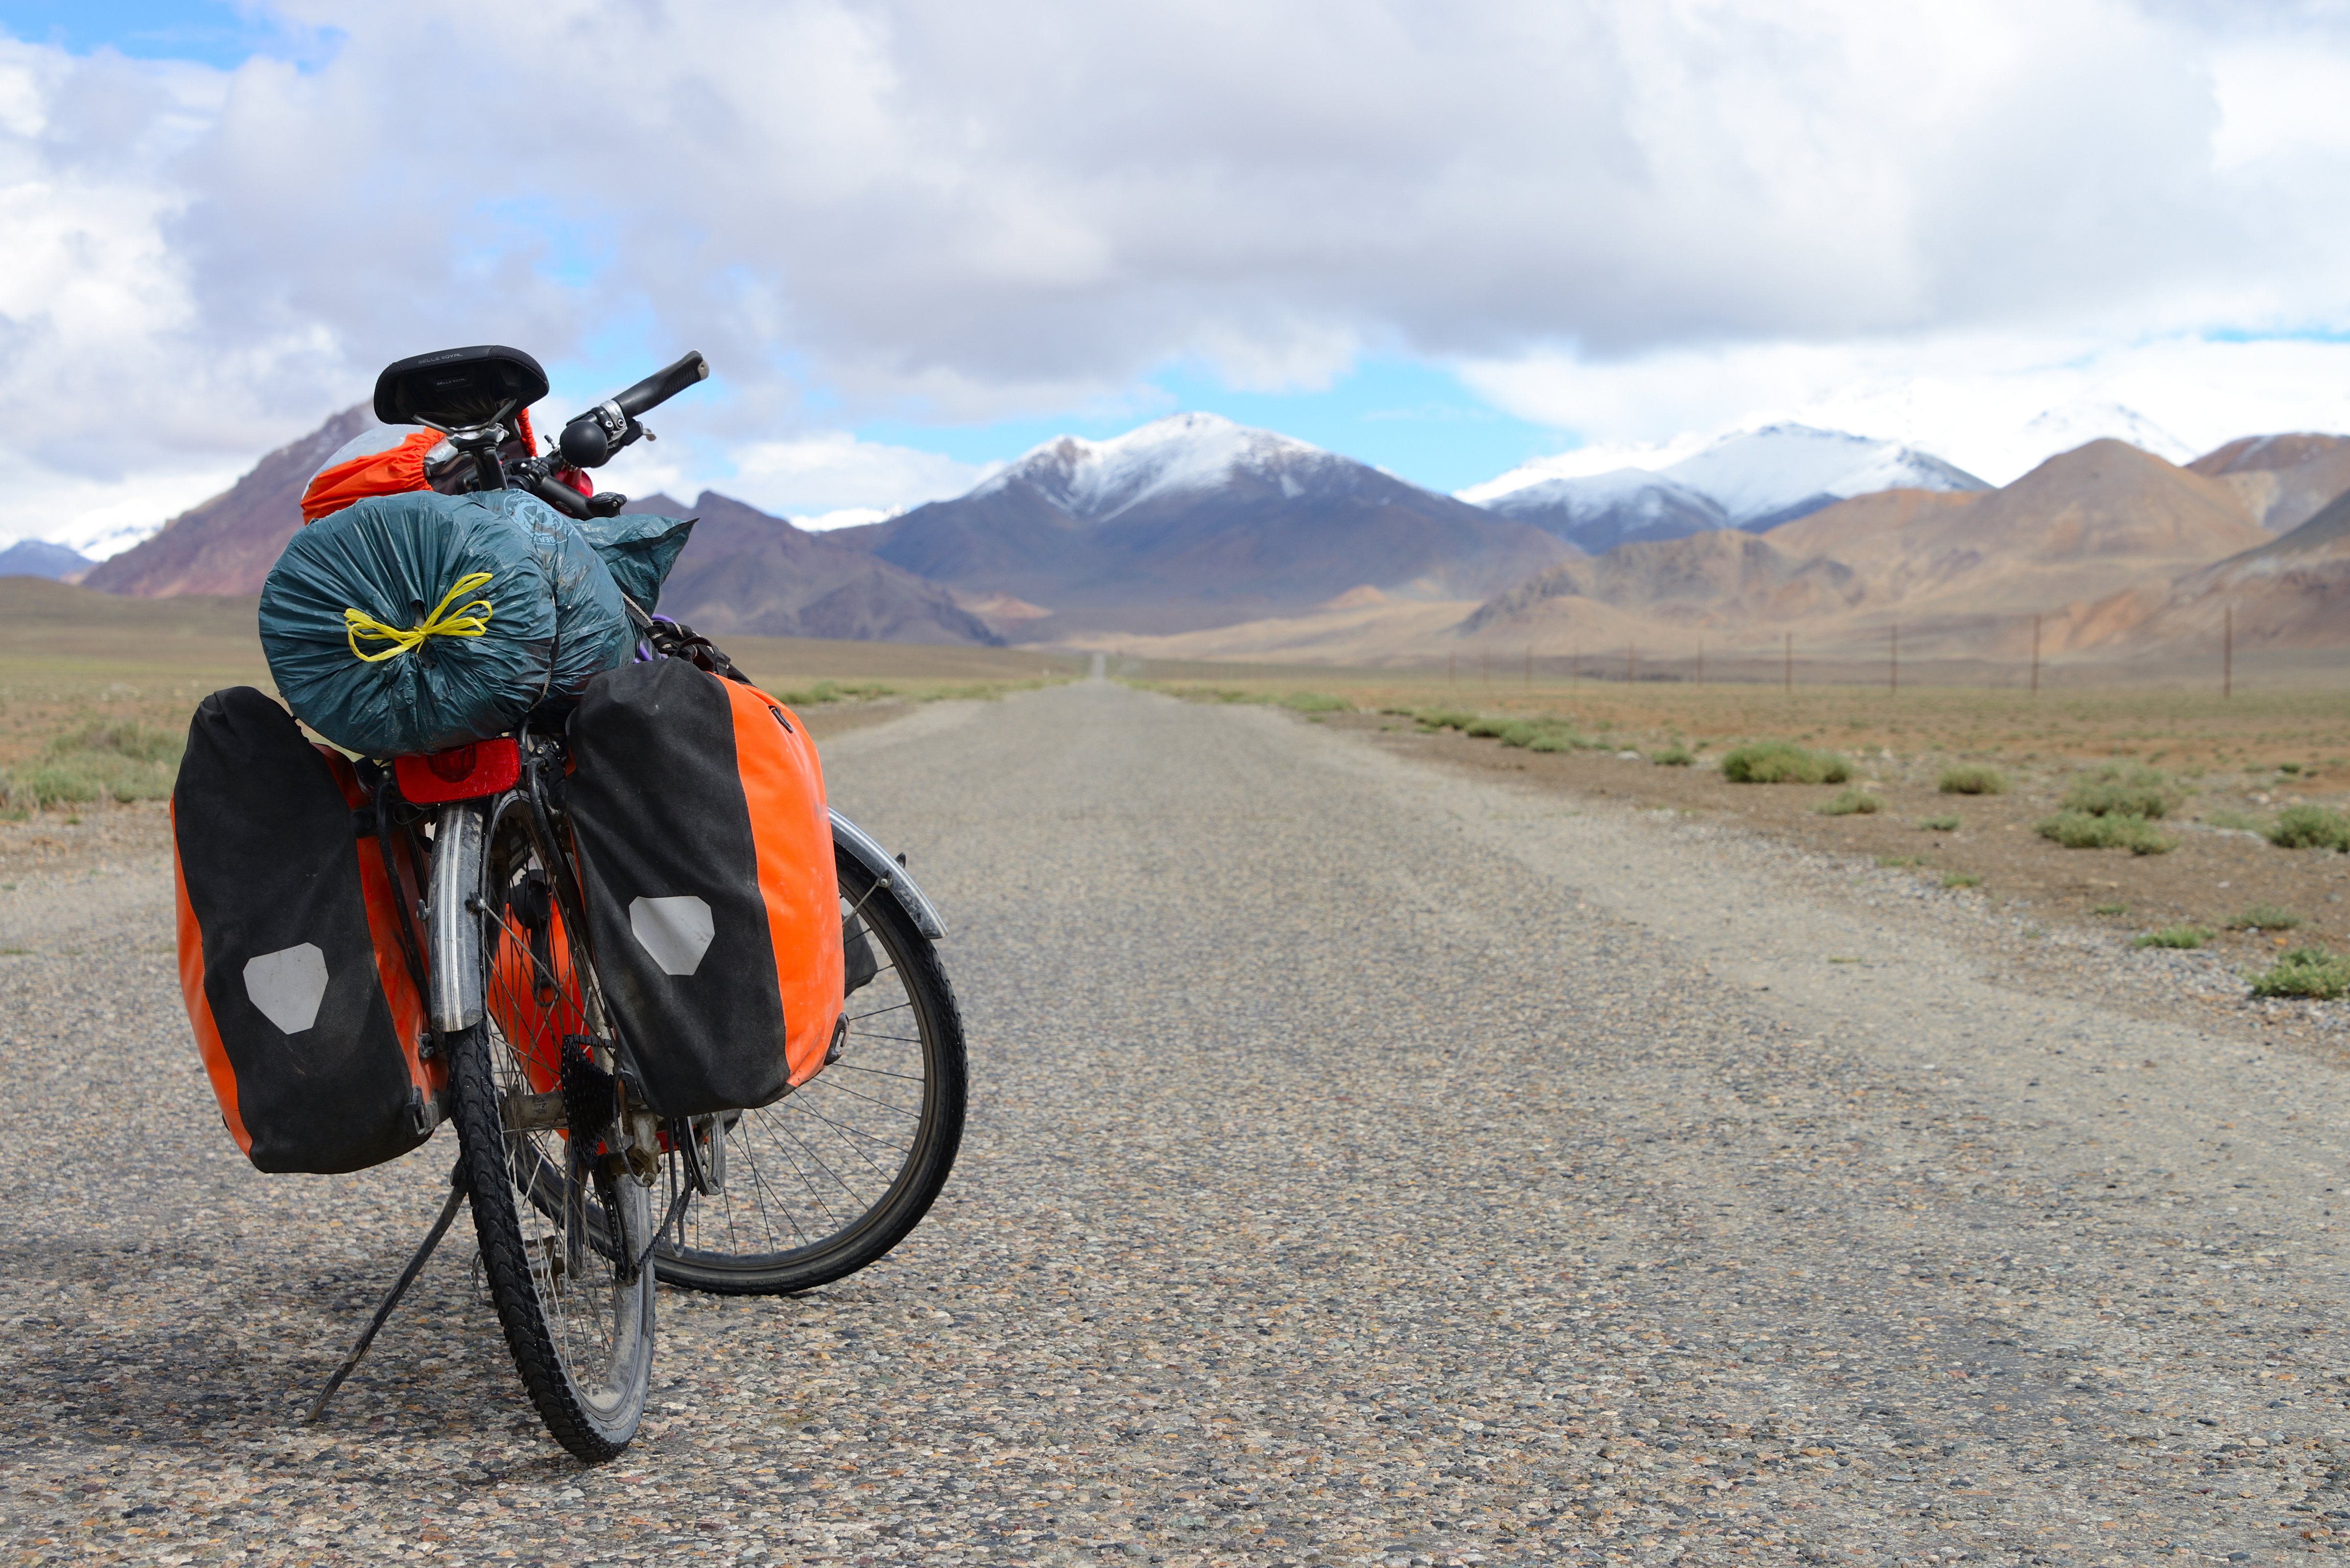 A bicycle is seen on the M41 Pamir Highway in Tajikistan (Travel_Nerd&mdash;iStockphoto/Getty Images)